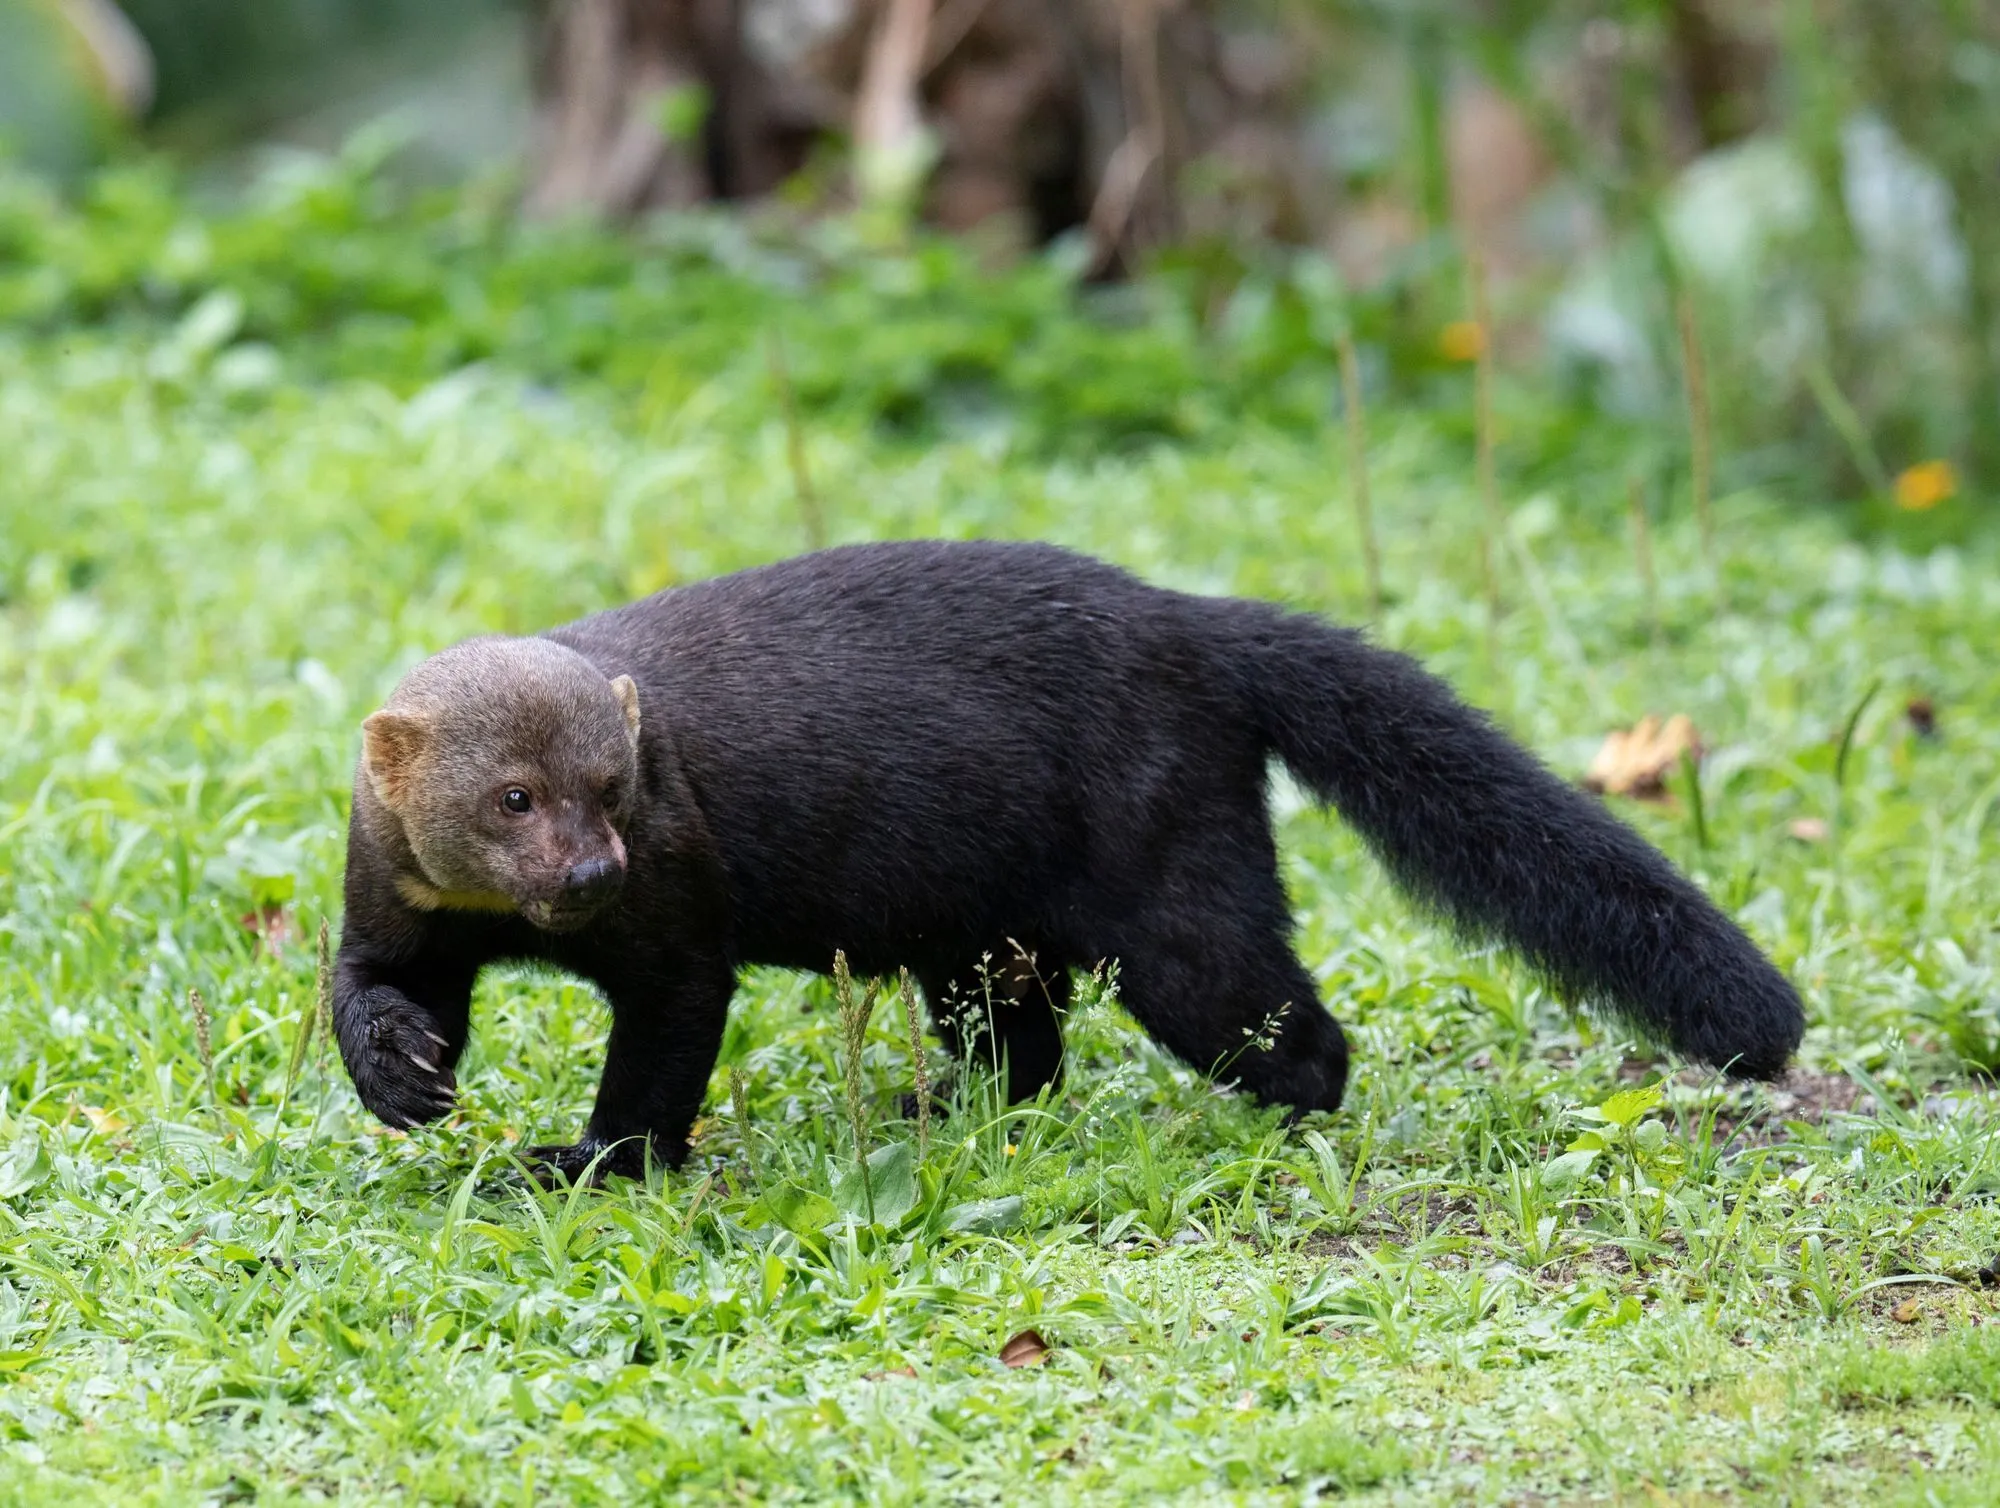 The long tail of the tayra is one of the most gripping features of this animal.